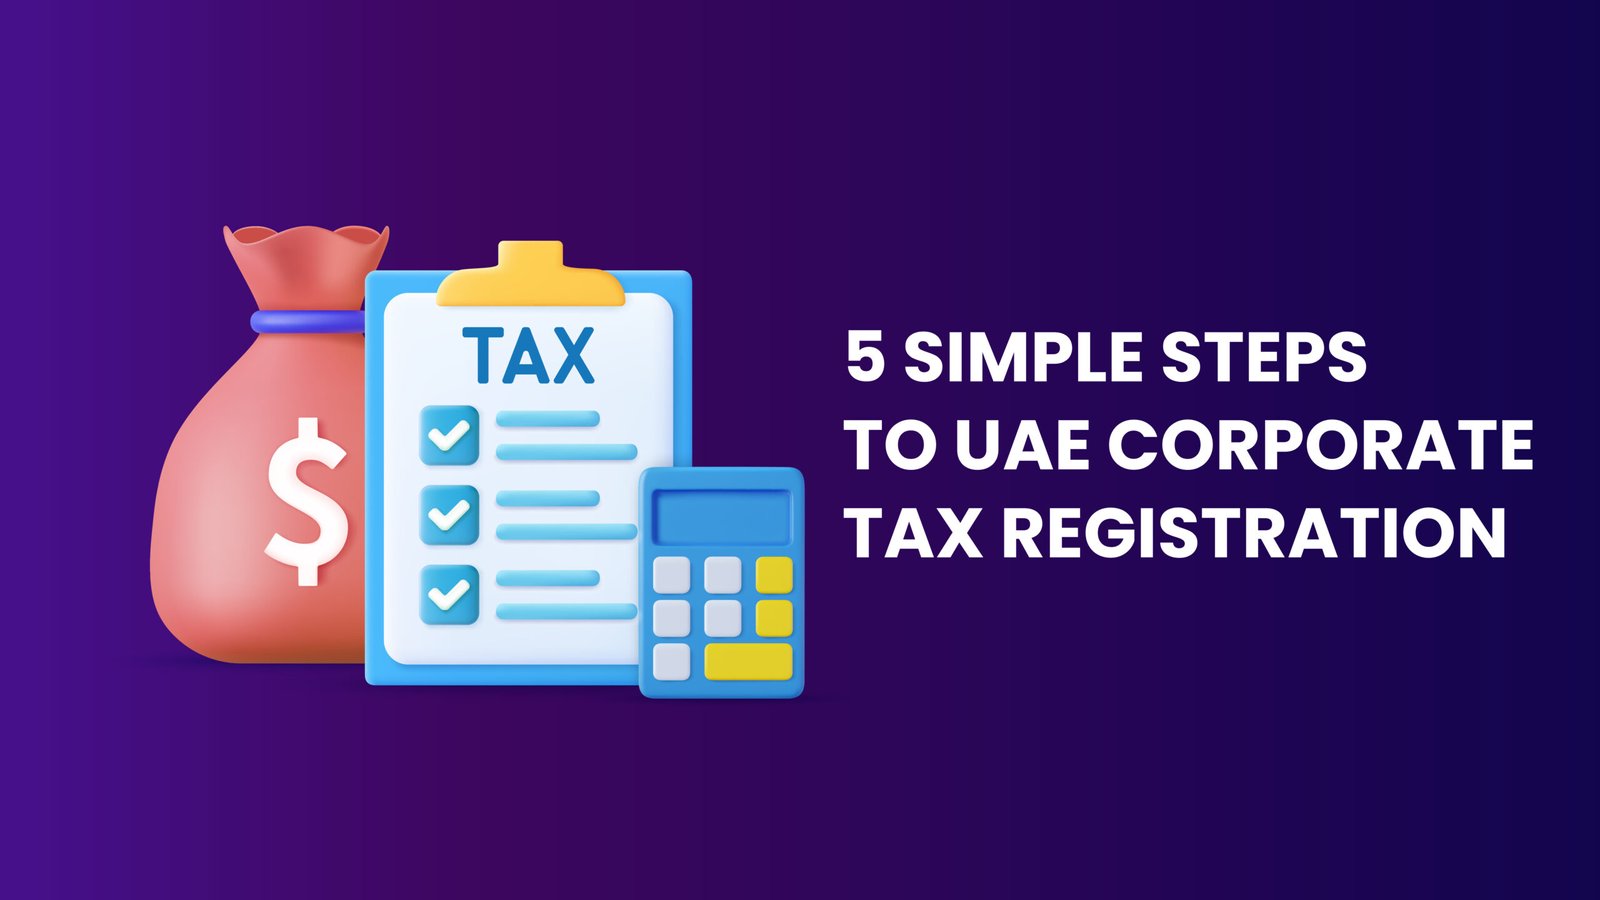 5 Simple Steps To UAE Corporate Tax Registration